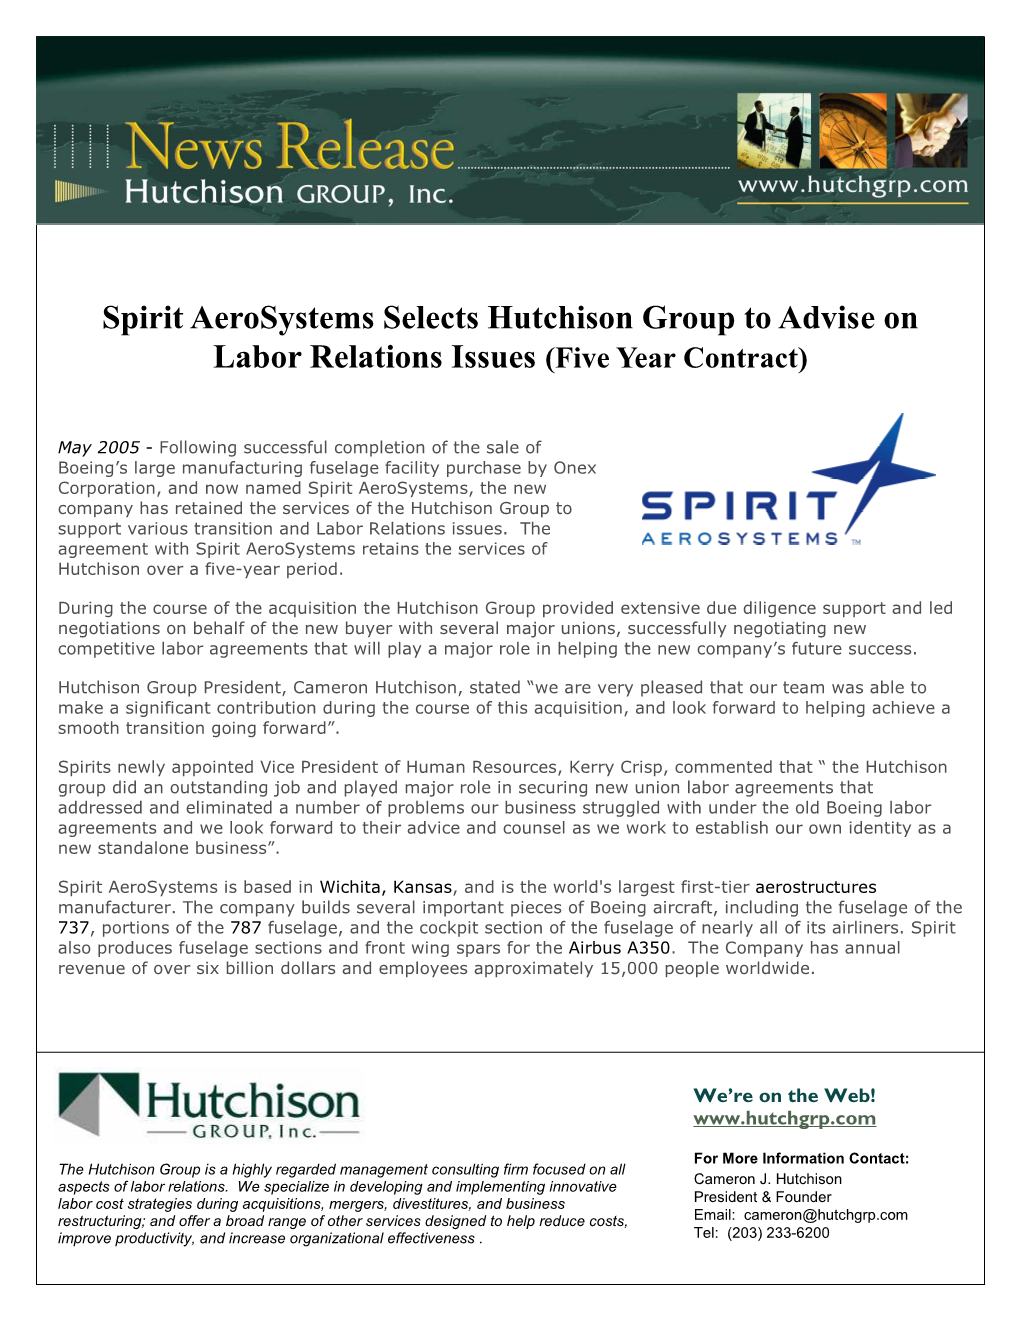 Spirit Aerosystems Selects Hutchison Group to Advise on Labor Relations Issues (Five Year Contract)